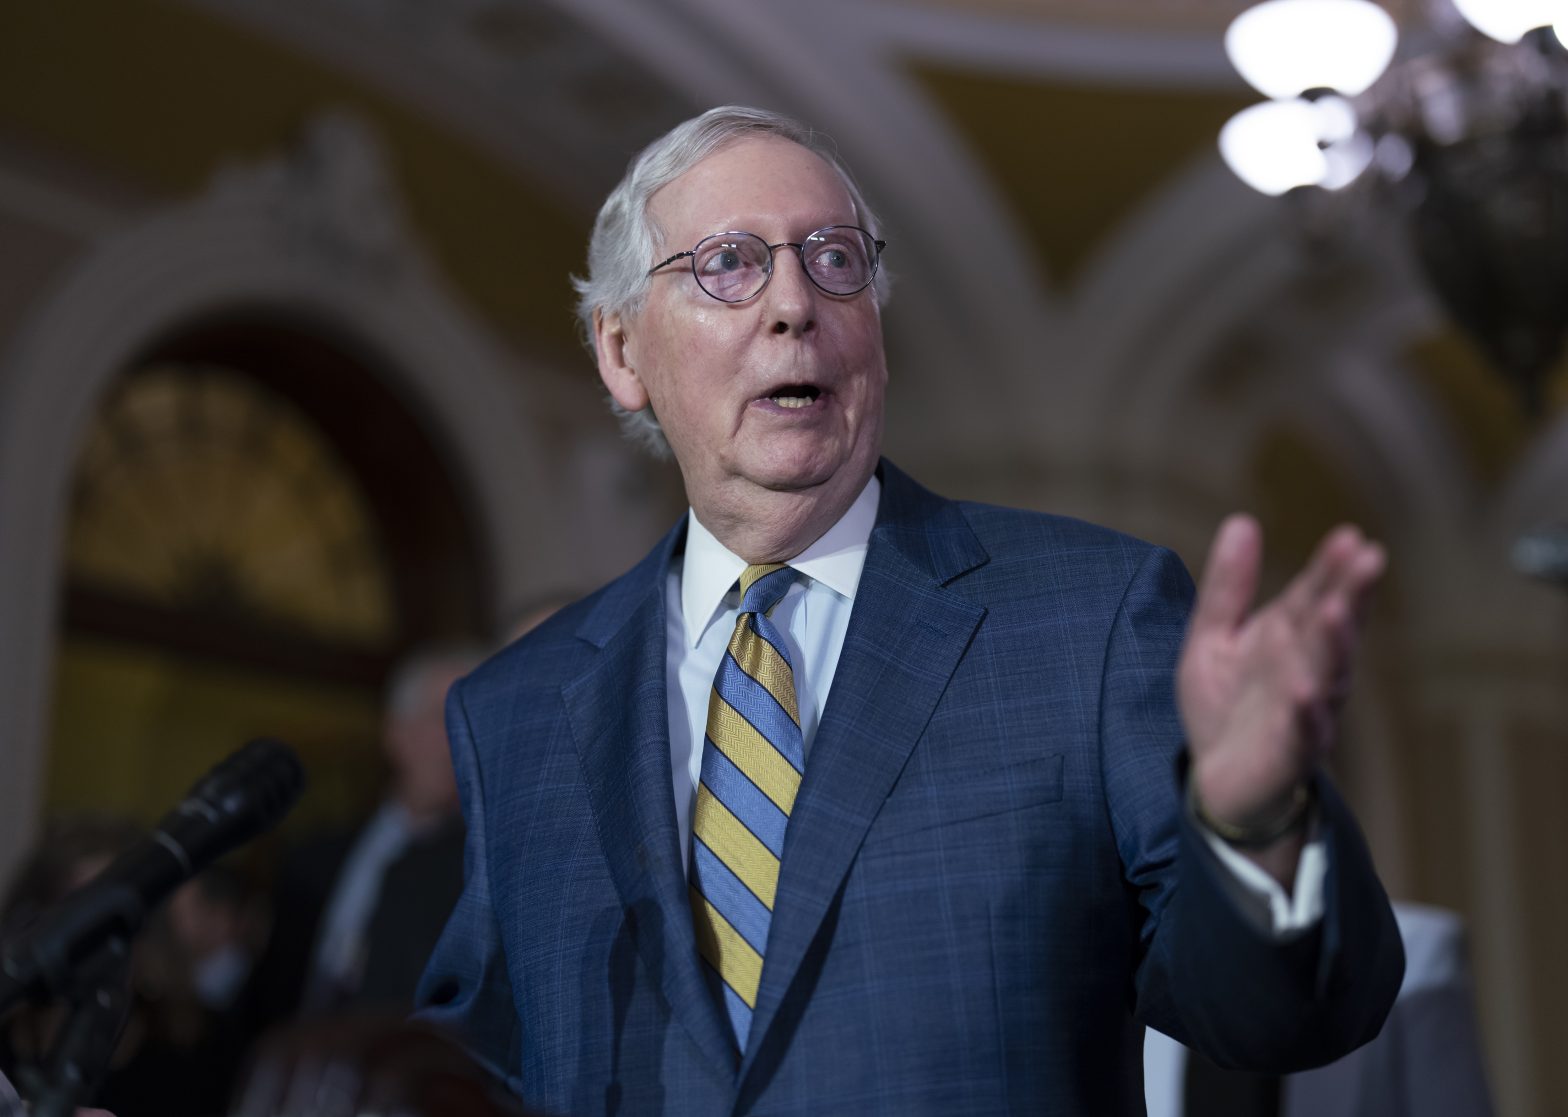 McConnell Discharged From Hospital, Enters Rehab Facility